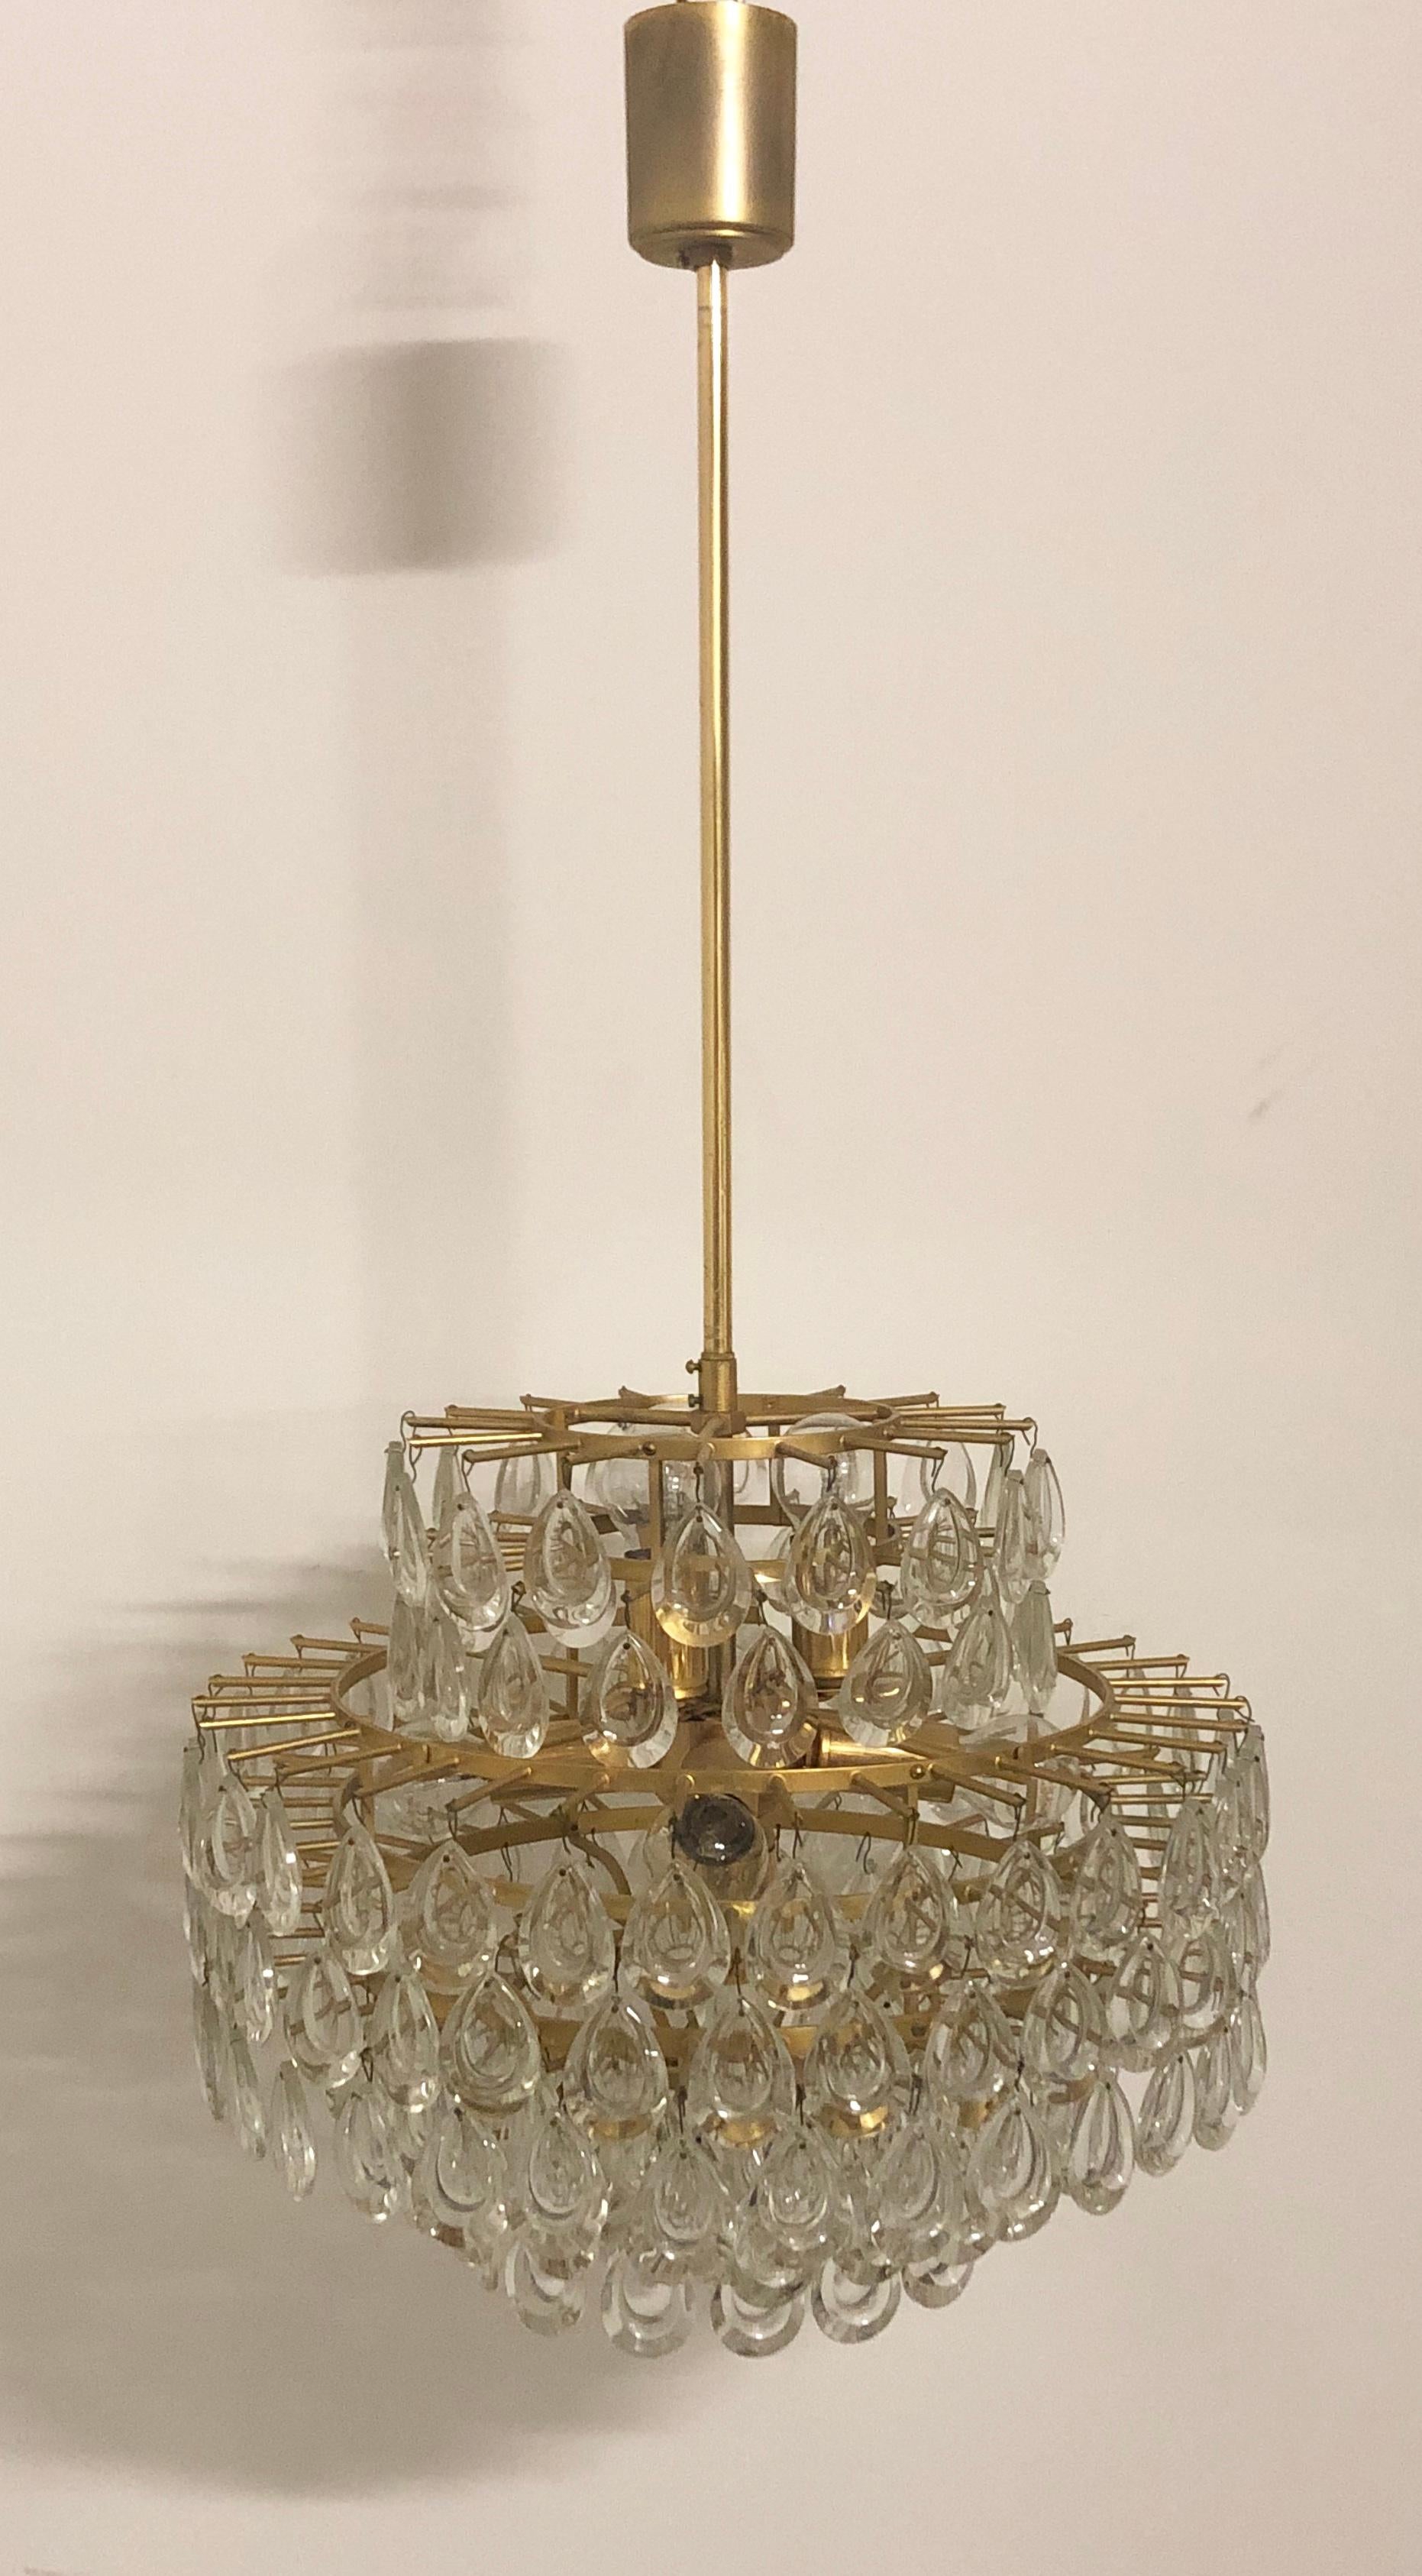 Mid-20th Century Seven-Tiered Chandelier by Palwa, Git Brass and Lenses Glass, circa 1960s For Sale